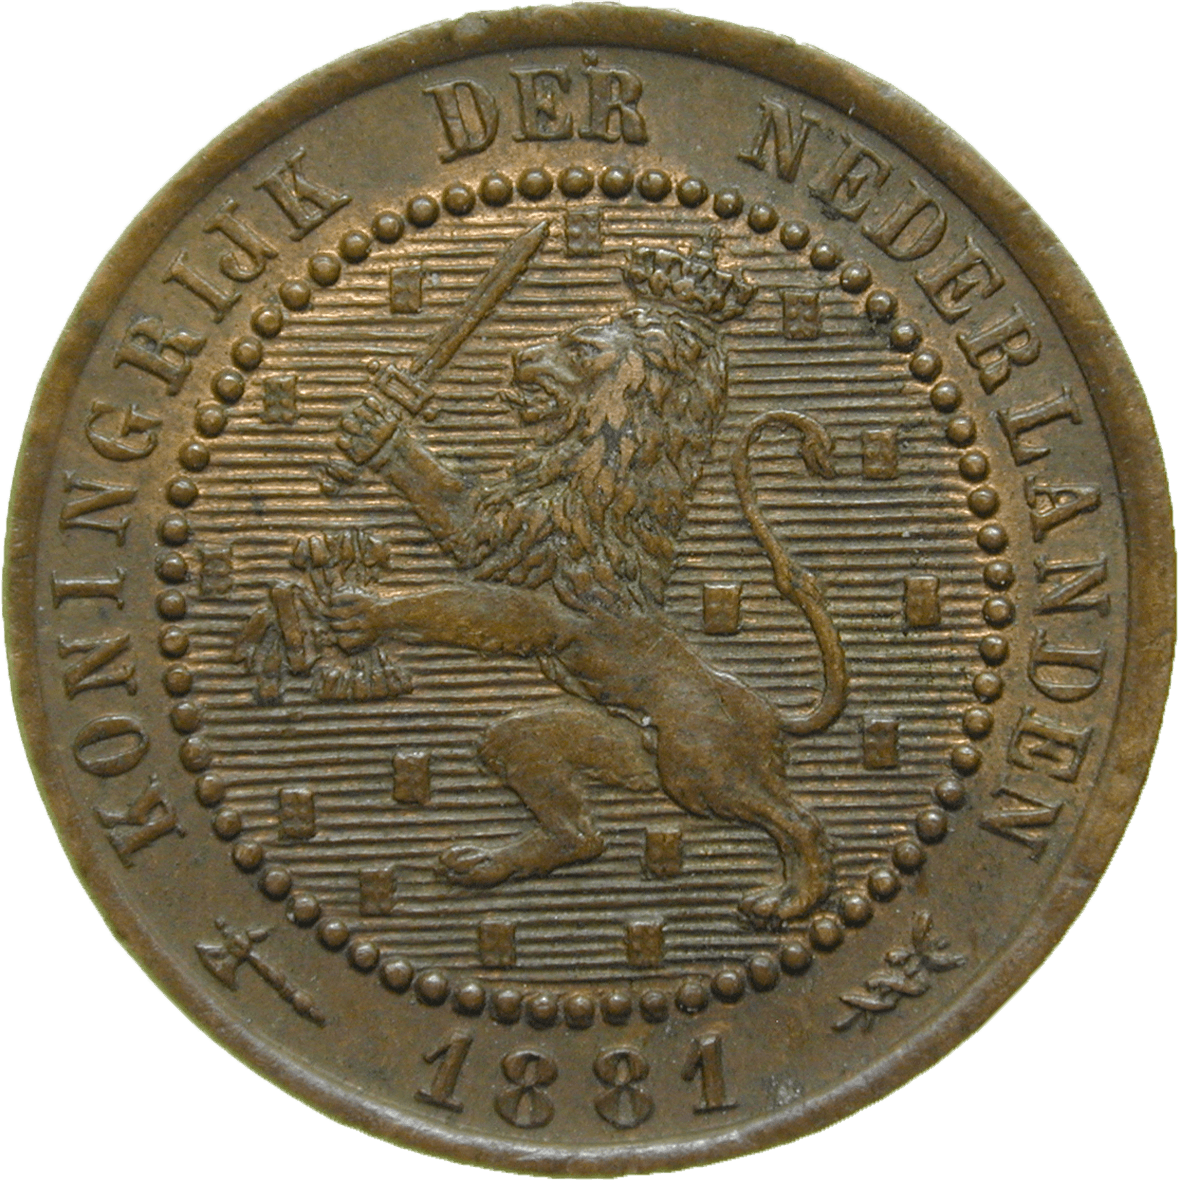 Kingdom of the Netherlands, William III, 1 Cent 1881 (obverse)